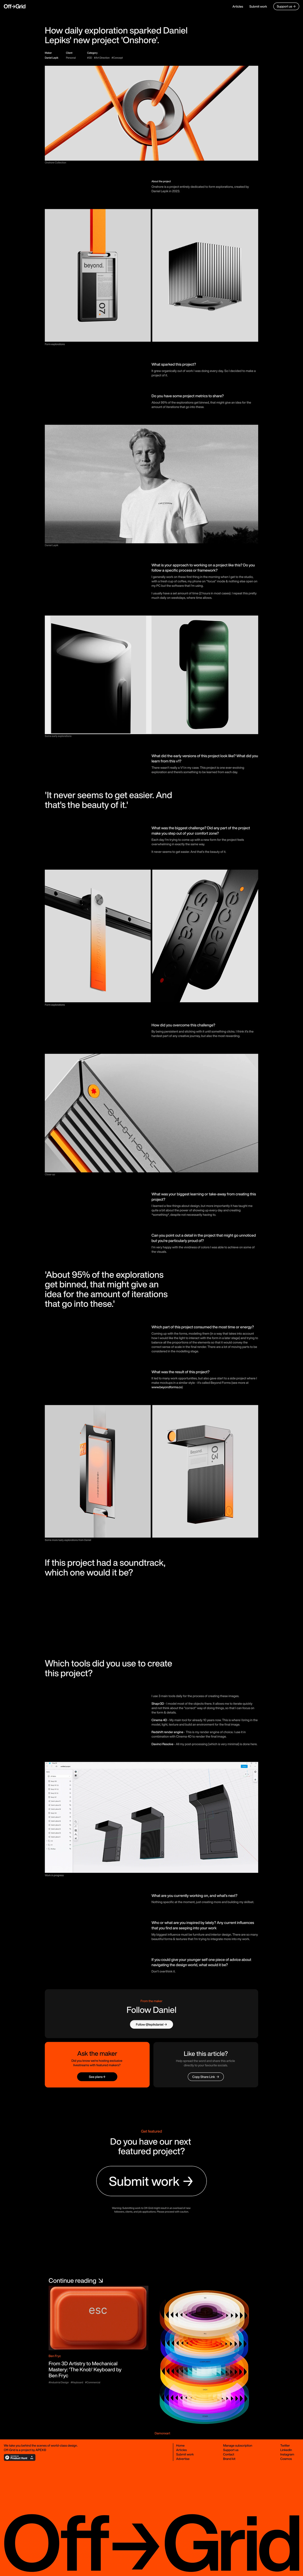 Off-Grid Landing Page Example: We take you behind the scenes of world-class design.